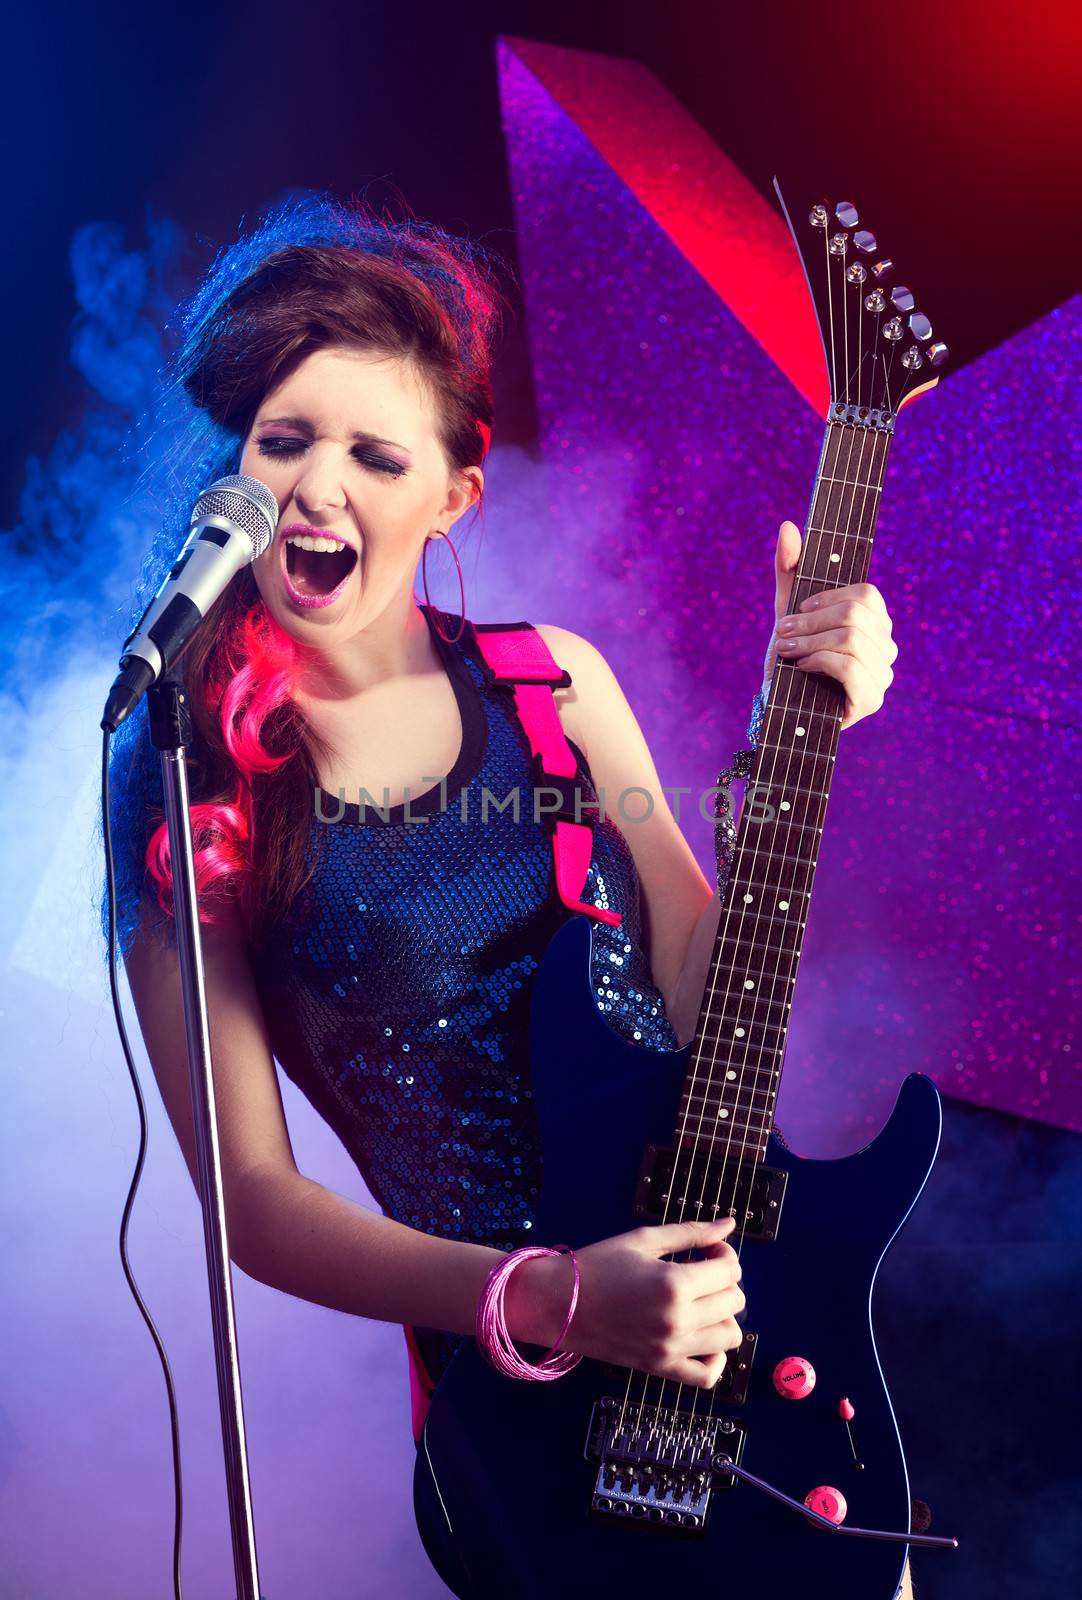 Young teenager rock star singing and playing electric guitar on stage.